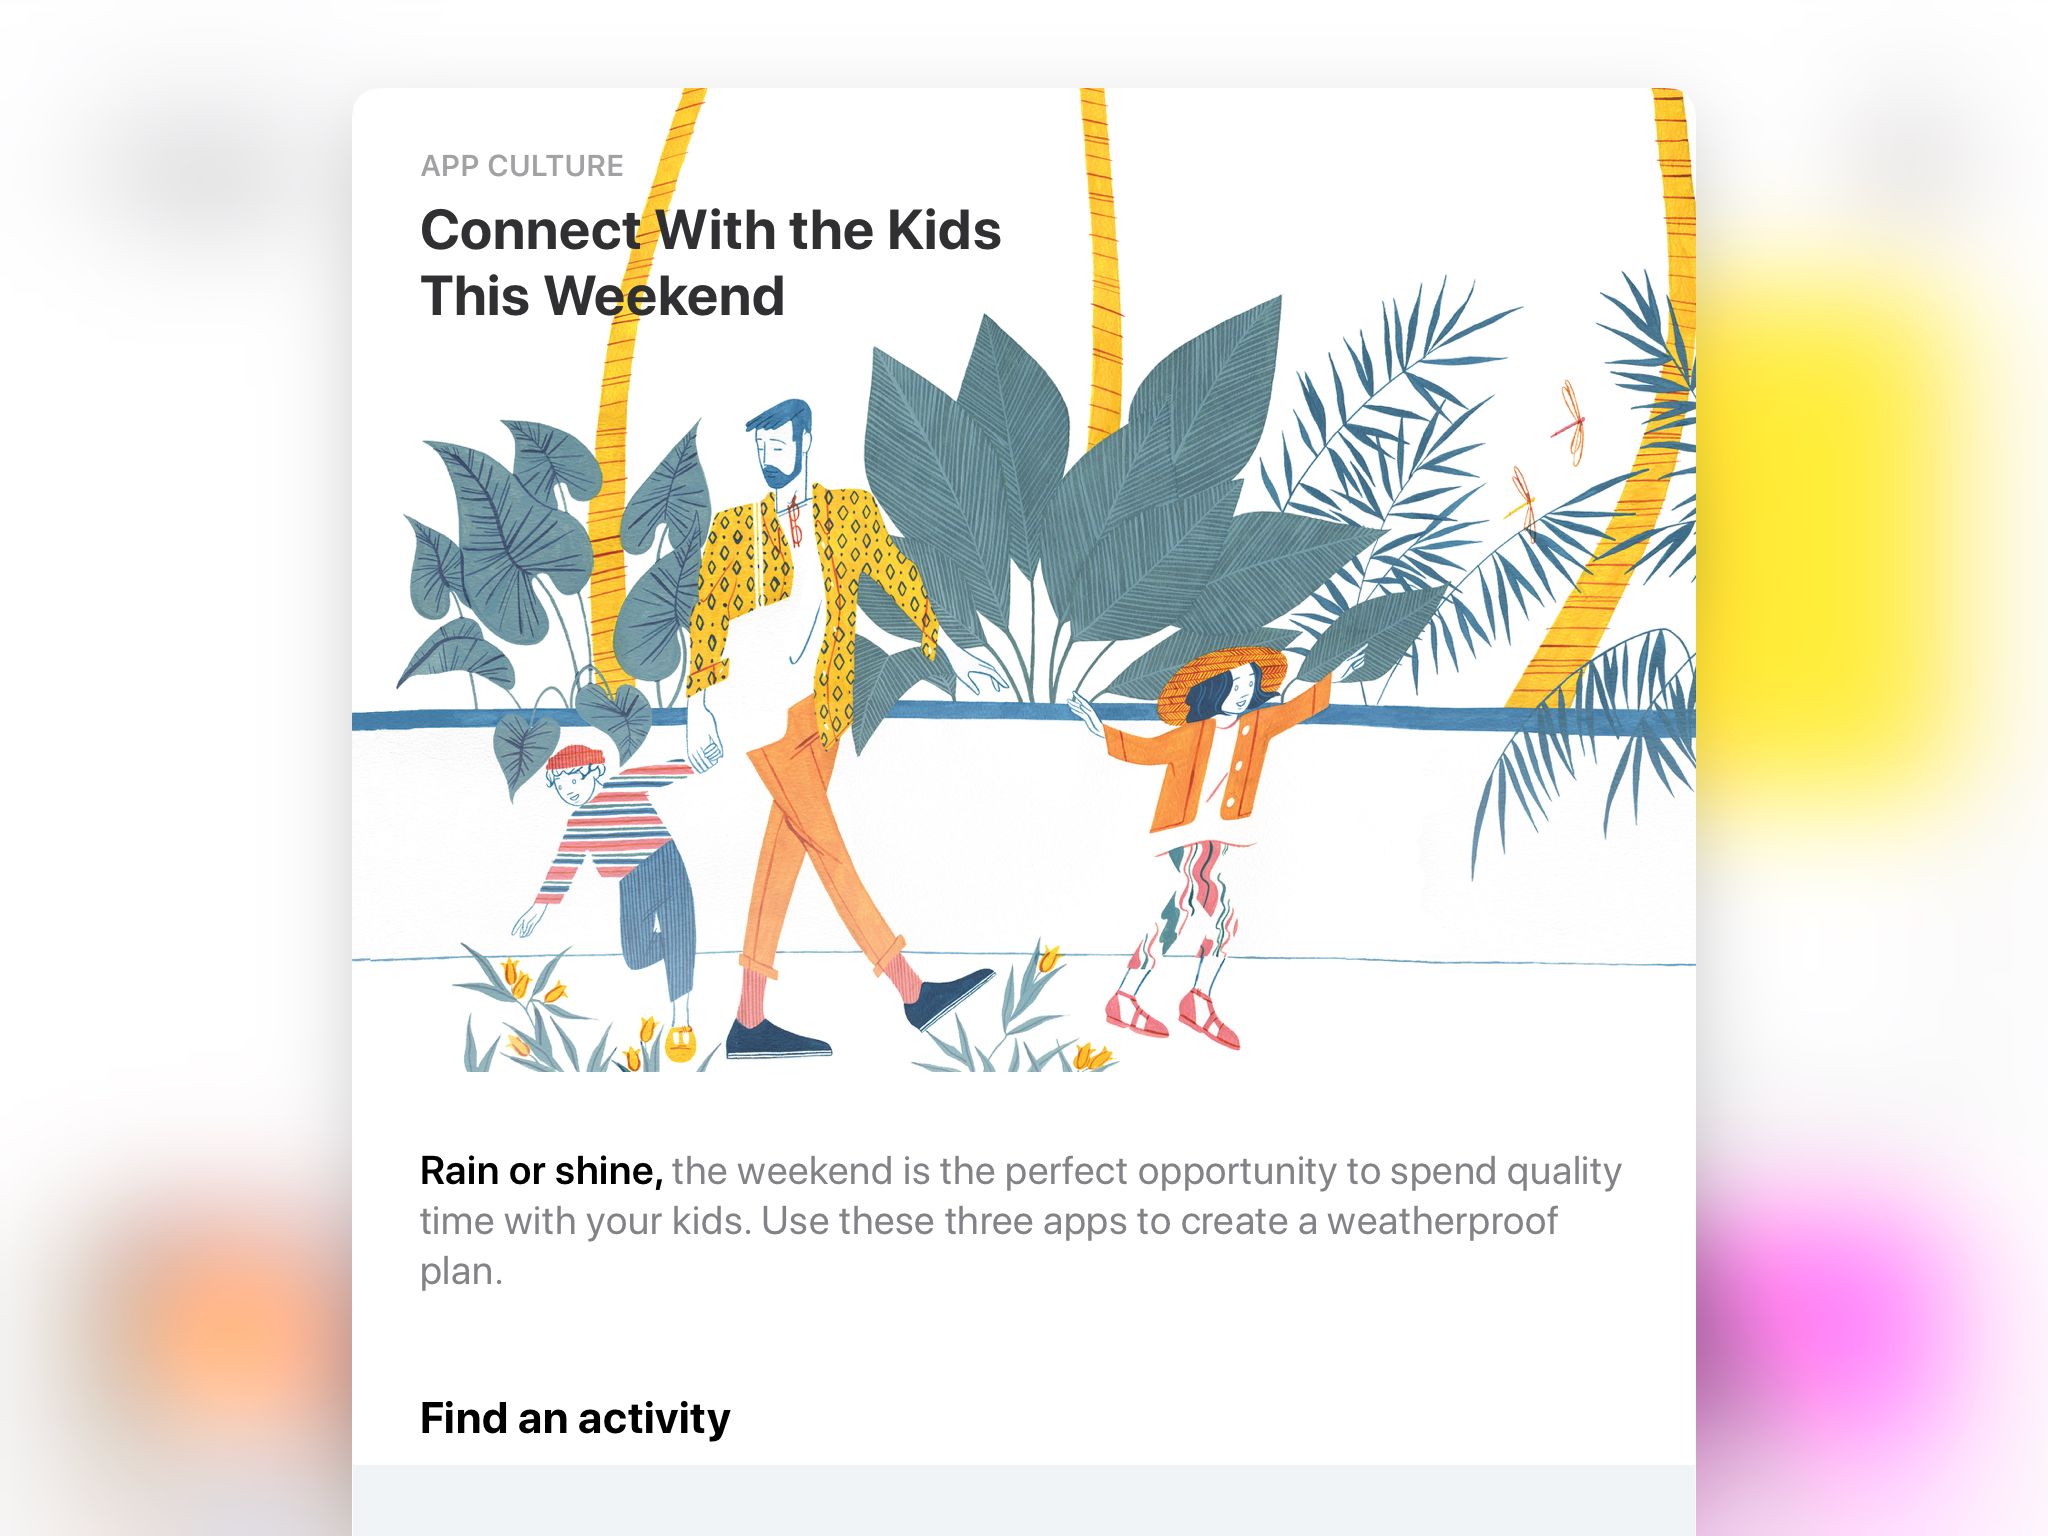 Illustration from the iOS App Store